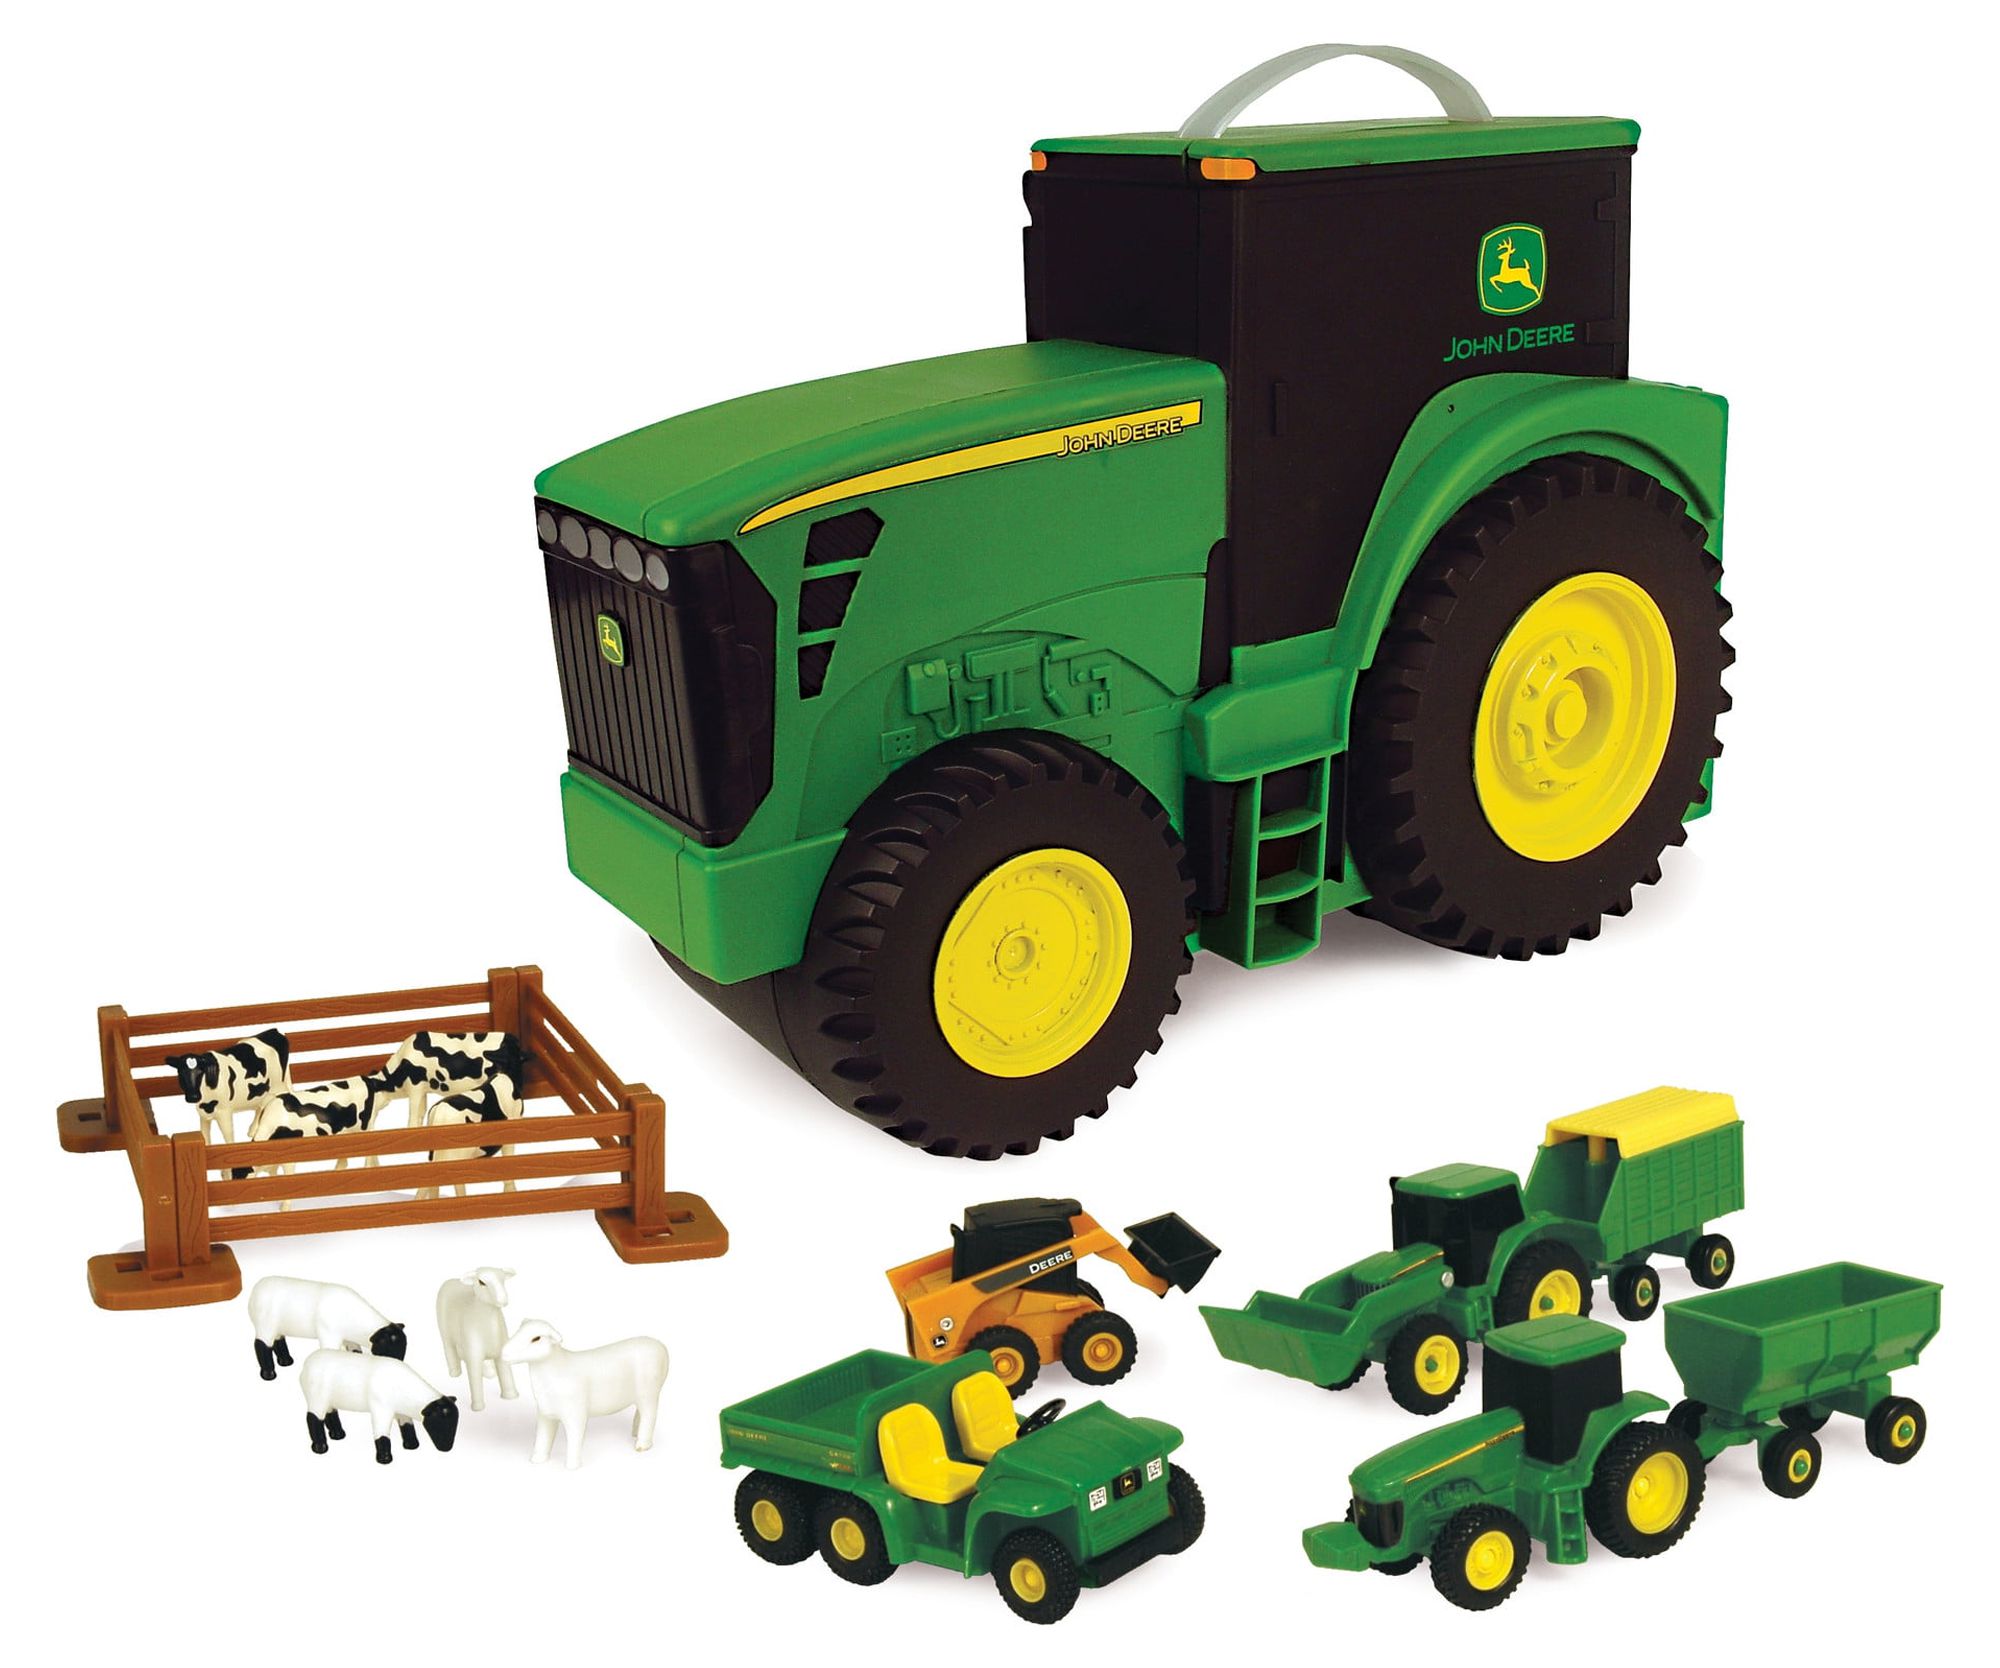 John Deere Tractor Toy Carry Case Value Farm Vehicle Playset, with Handle (18 Pieces) - image 1 of 7